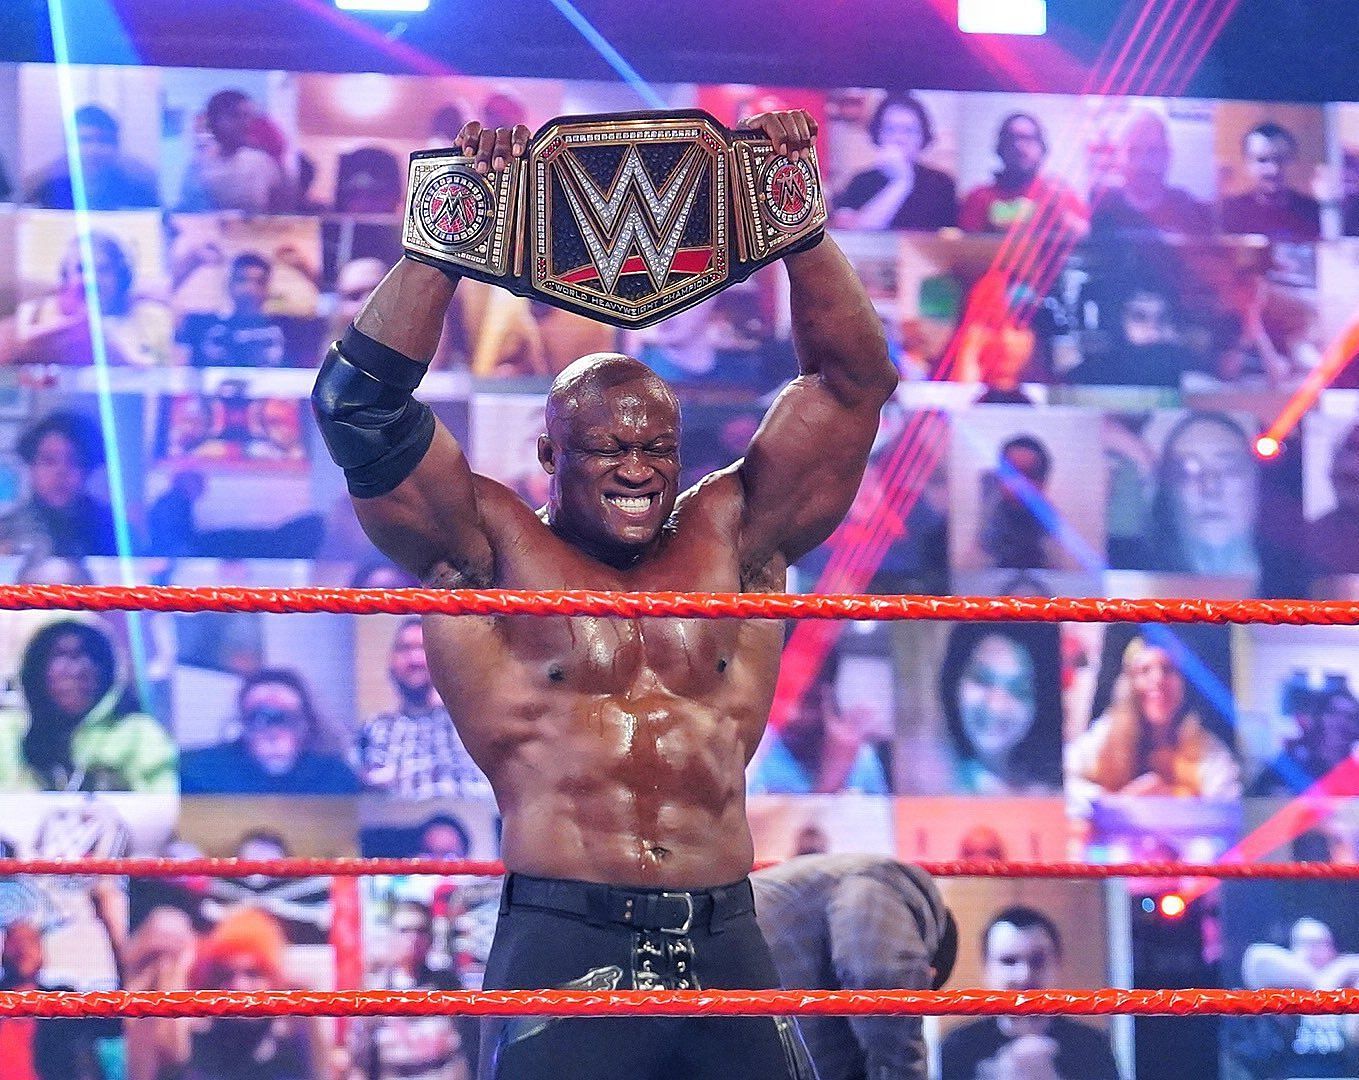 Bobby Lashley appears to have taken back his name 